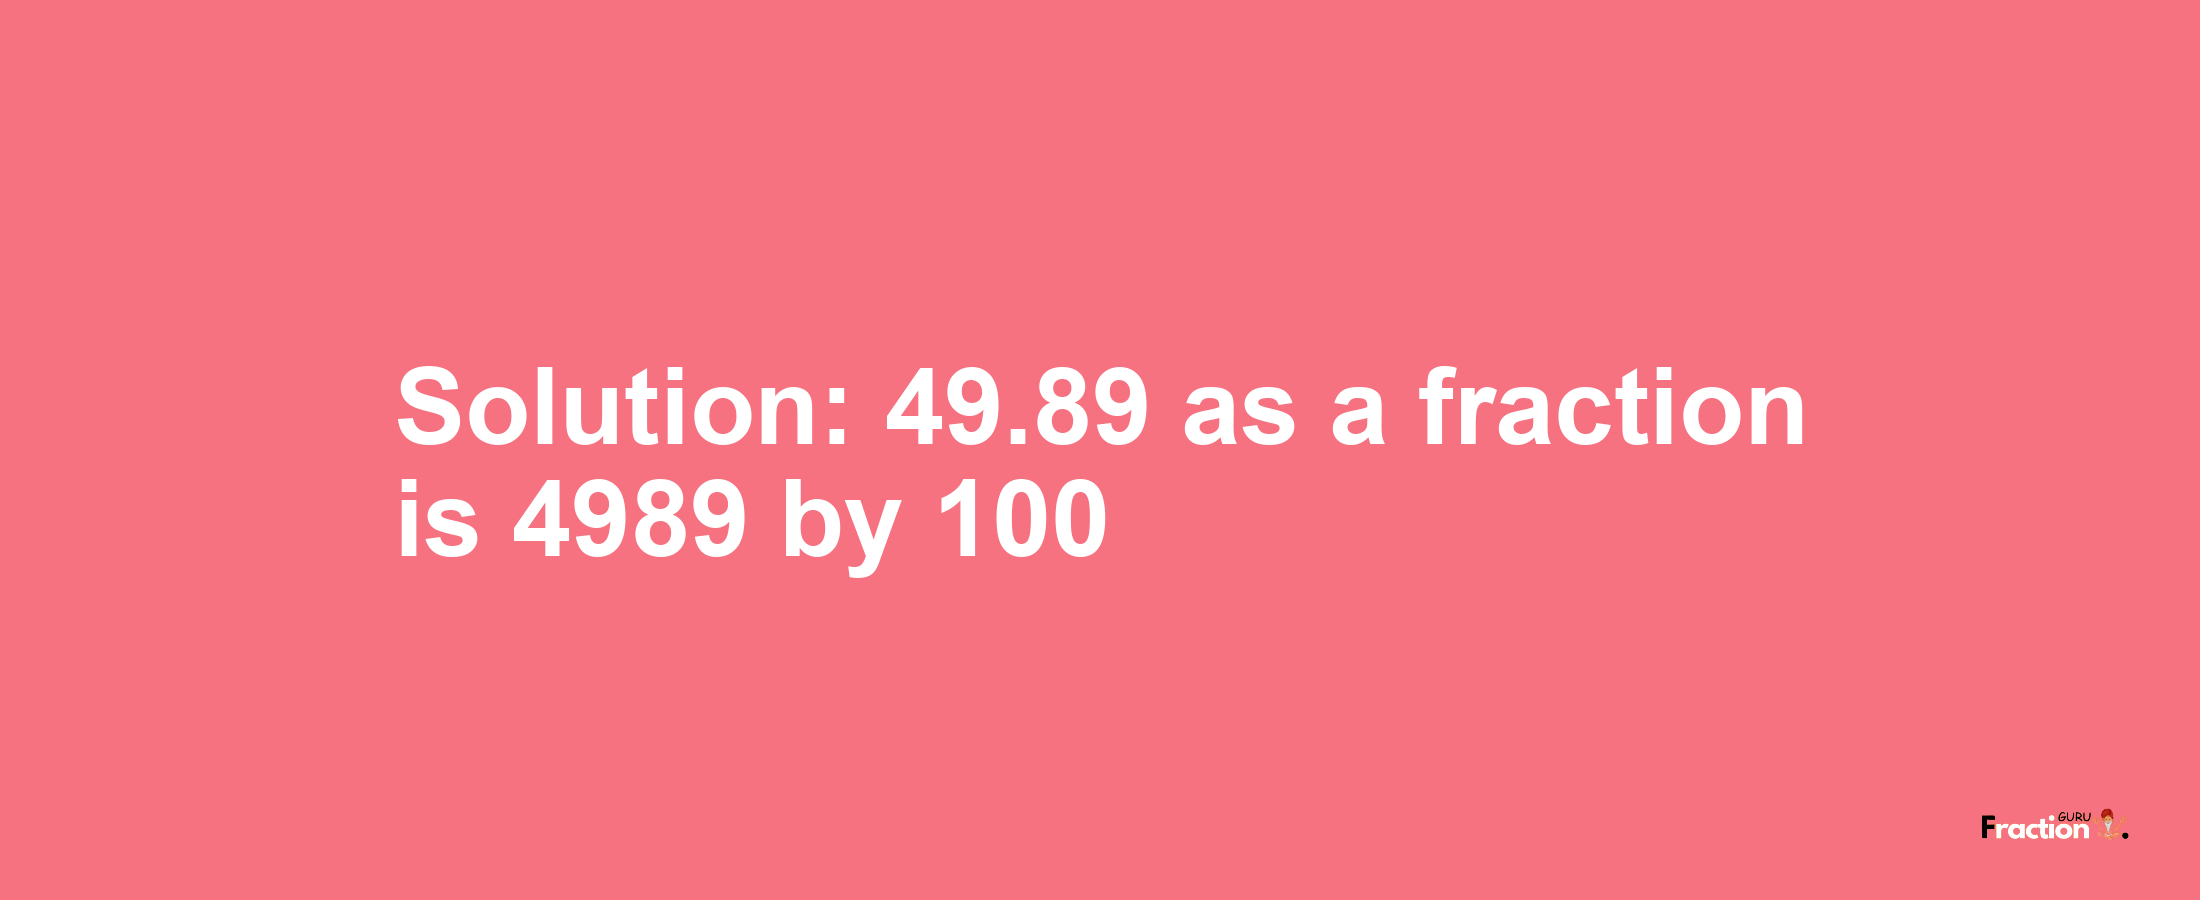 Solution:49.89 as a fraction is 4989/100